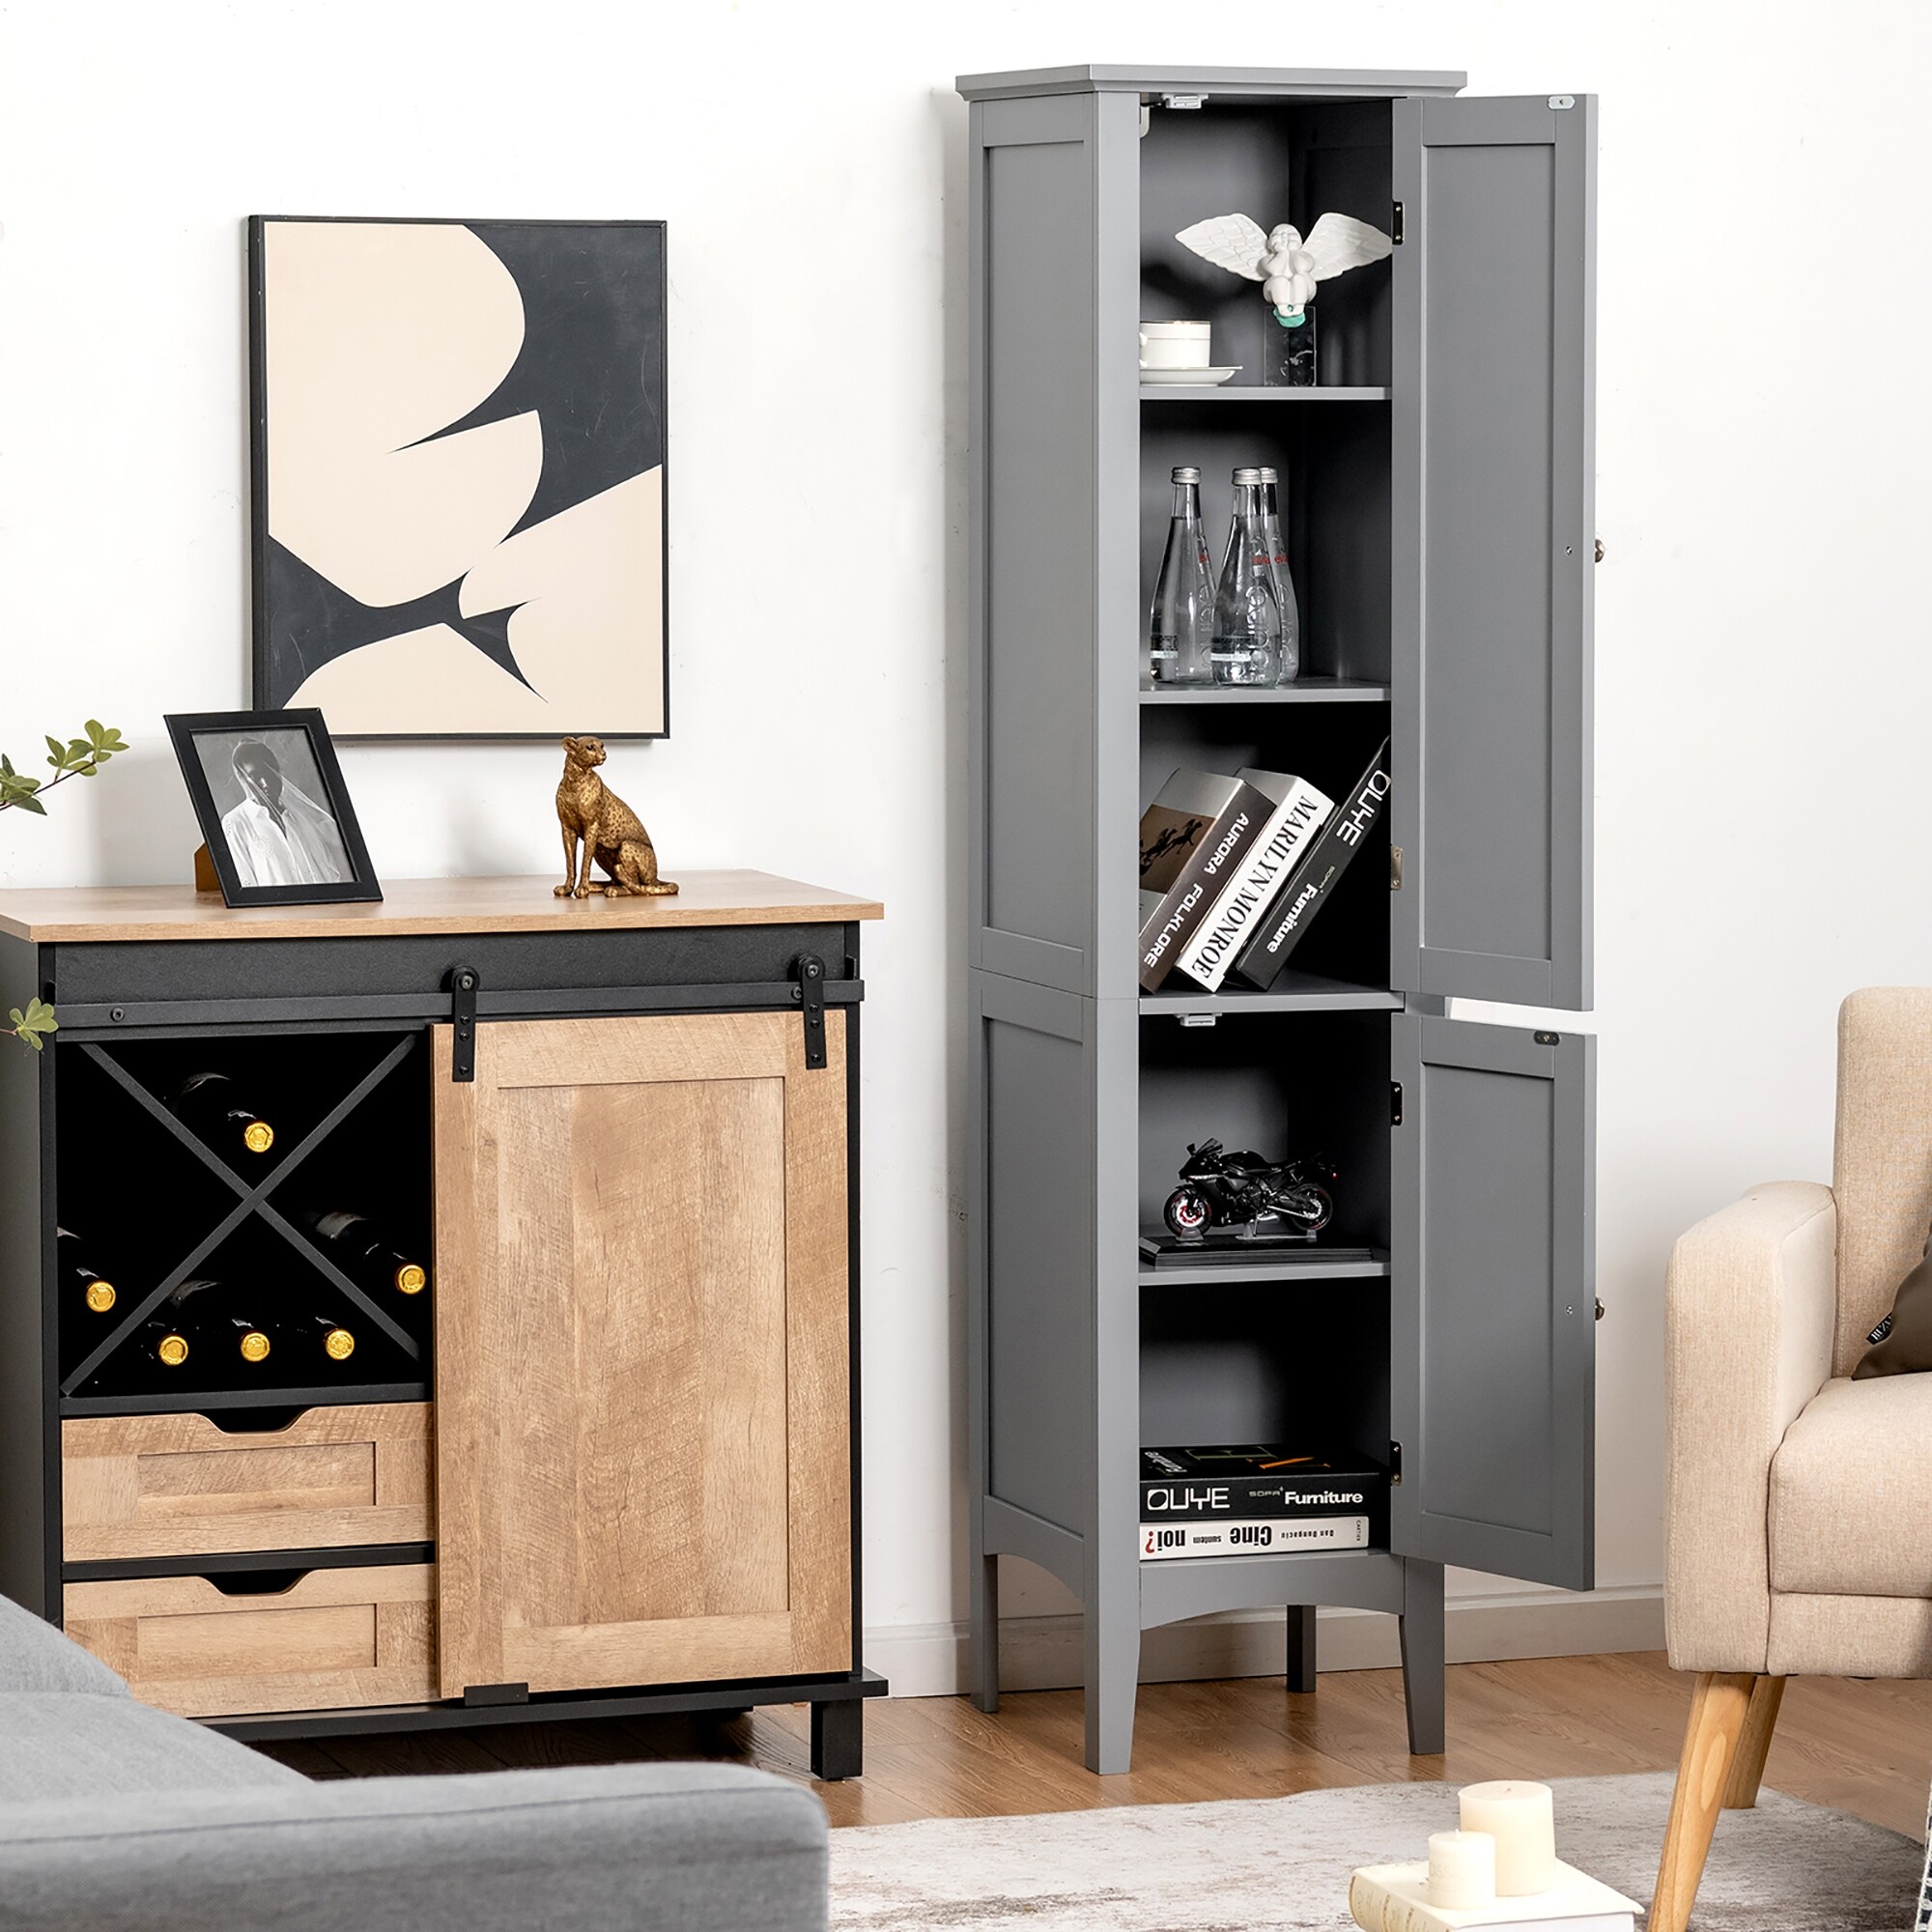 https://ak1.ostkcdn.com/images/products/is/images/direct/2cc1f09d3928fc4a6d1c3e04a06ce3b8dbaf5b24/Costway-Freestanding-Bathroom-Storage-Cabinet-Linen-Tower-Kitchen.jpg